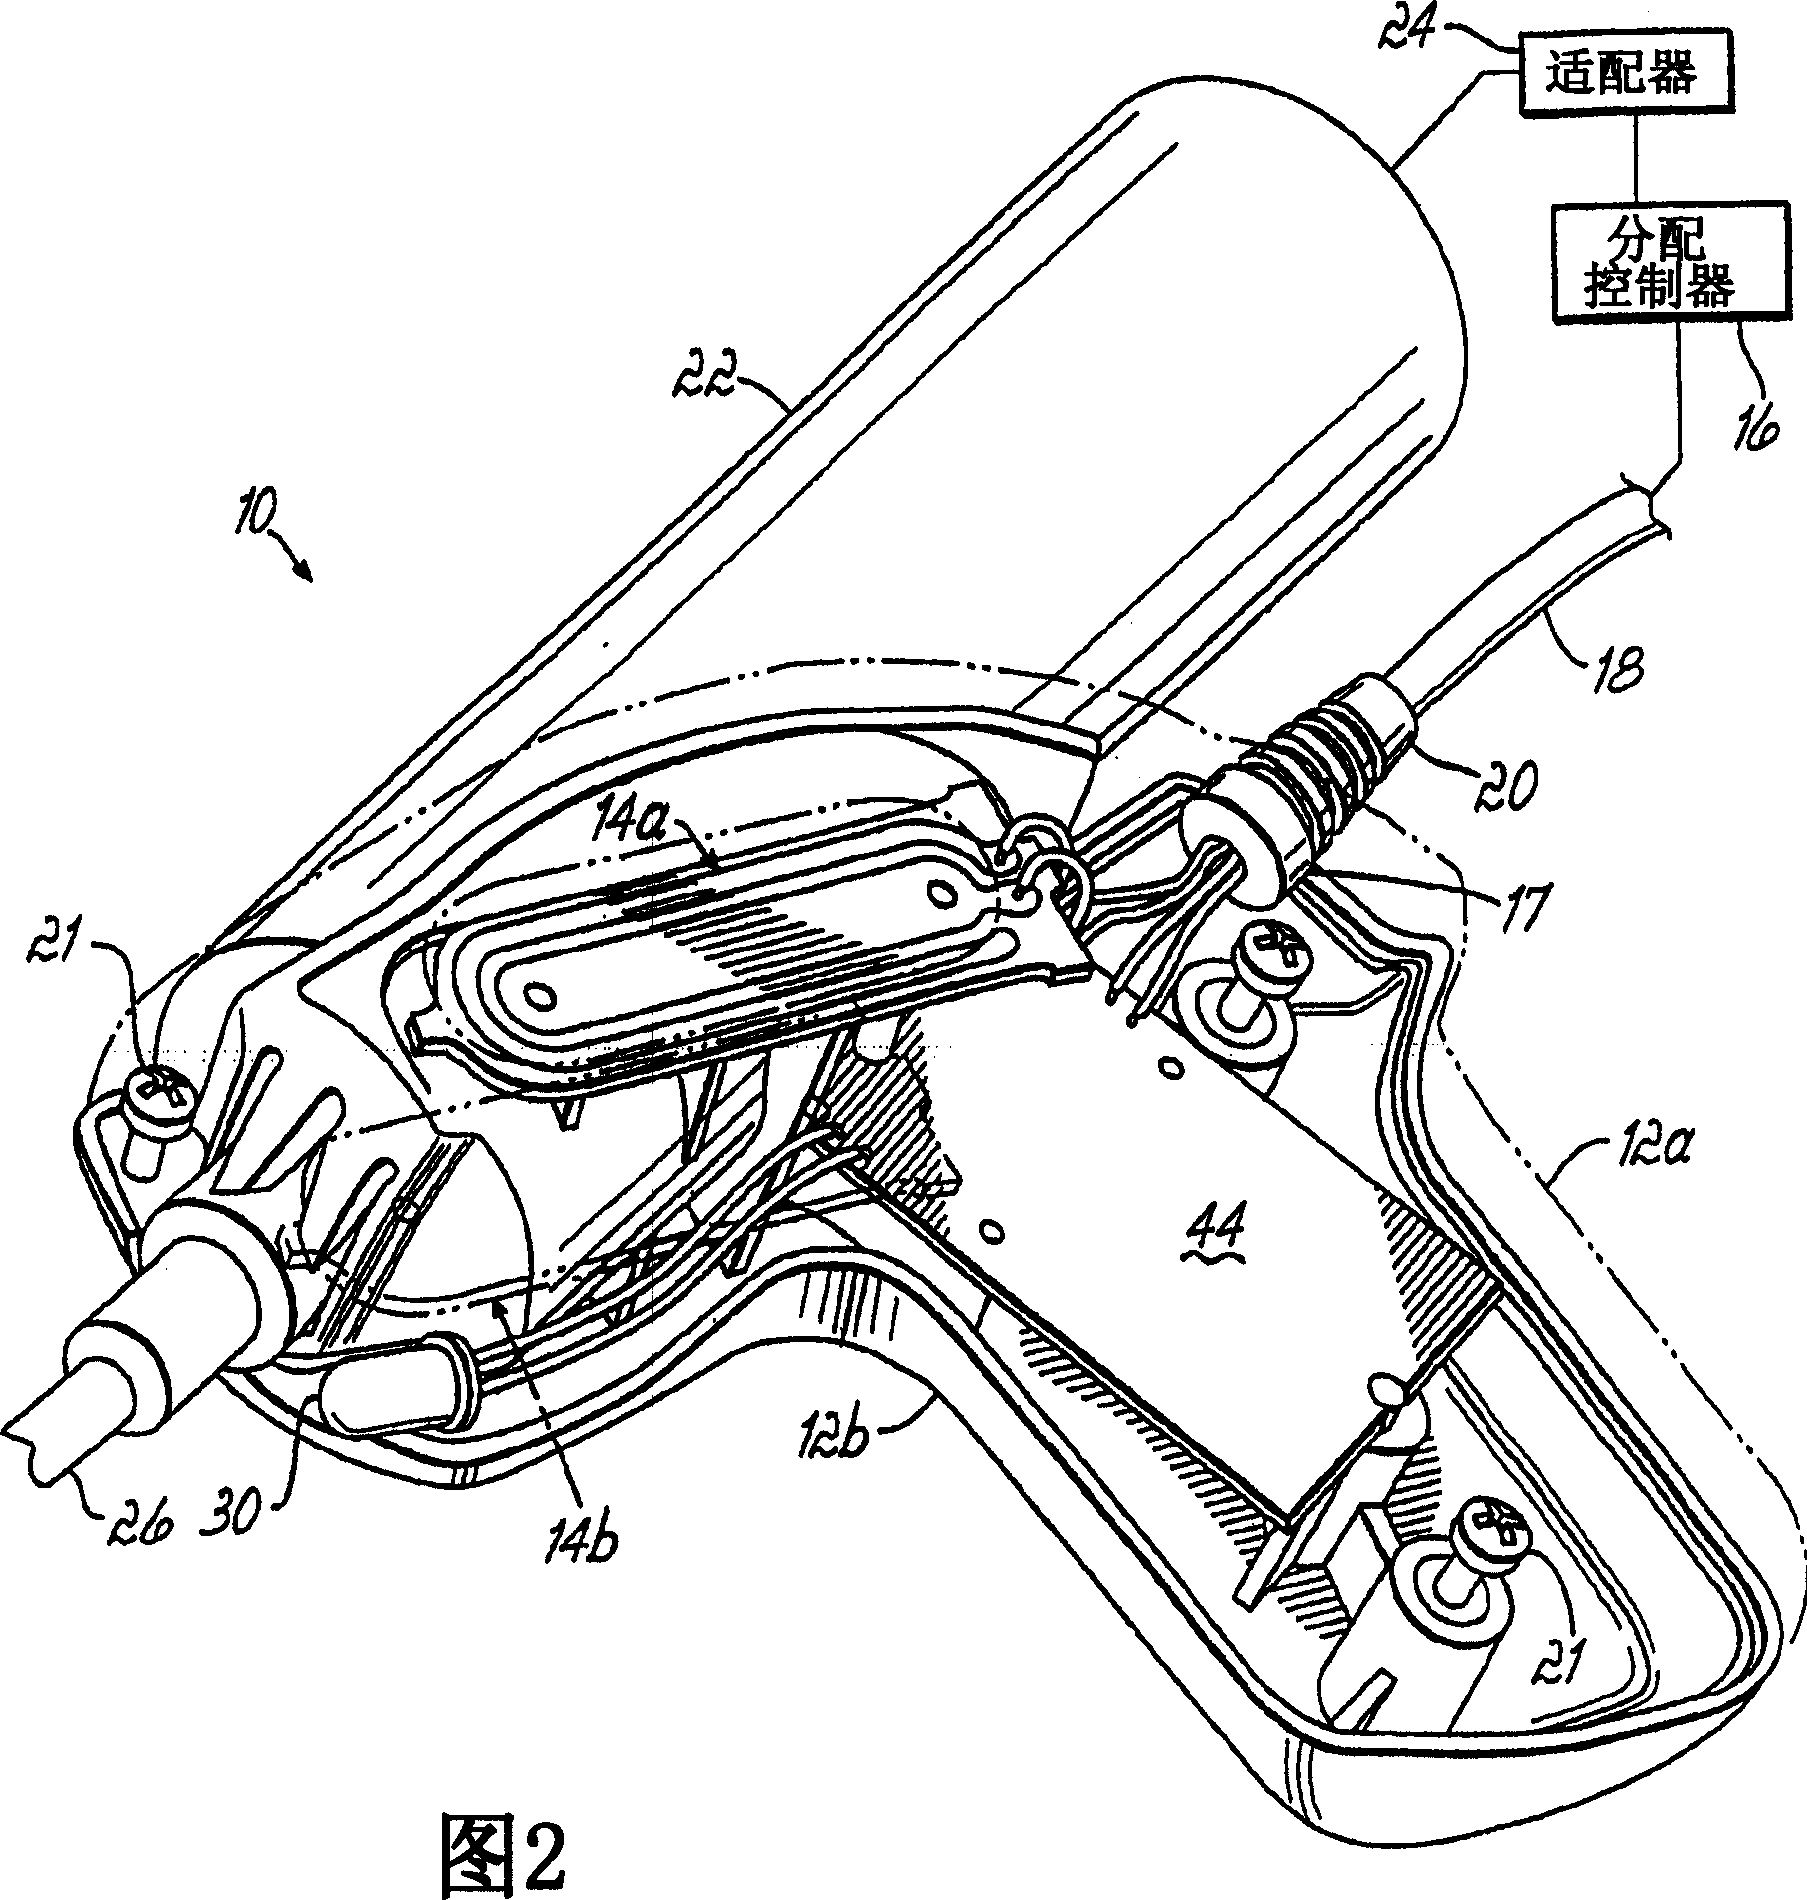 Hand-held fluid dispenser system and method of operating the same